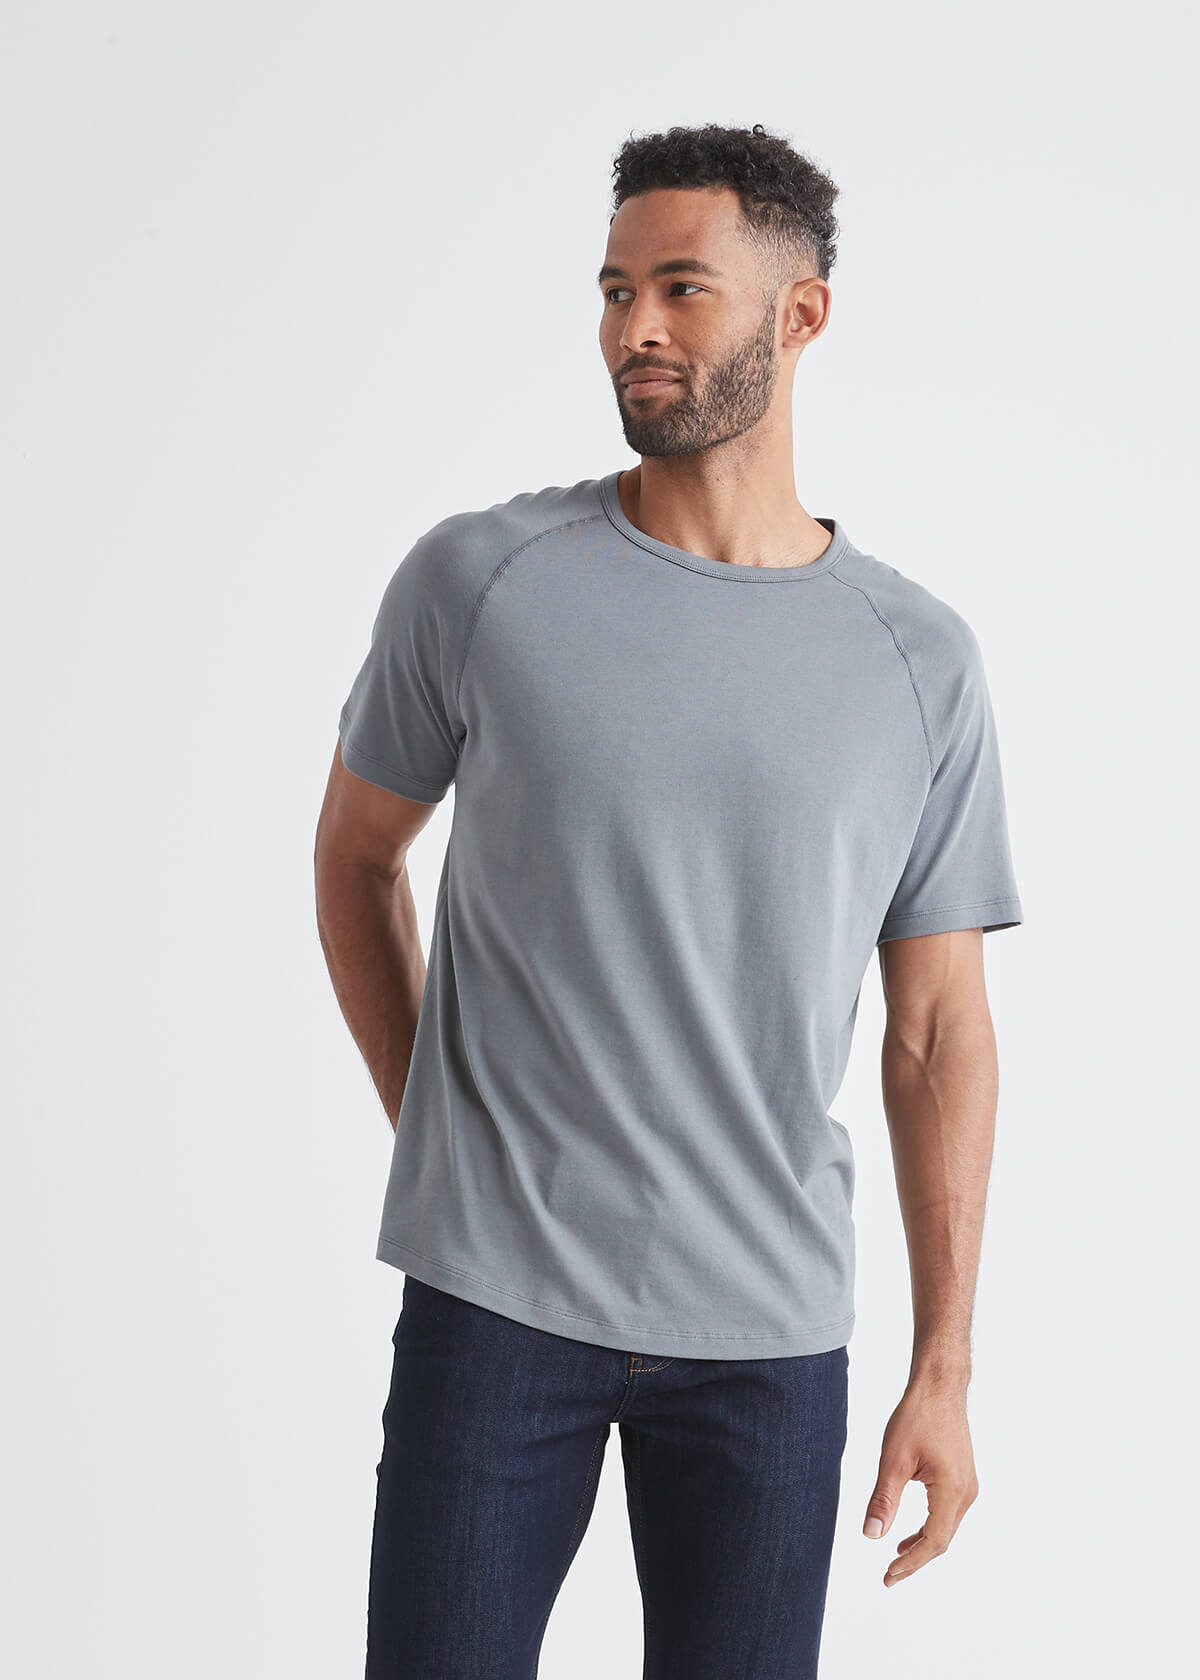 mens grey soft midweight t-shirt front